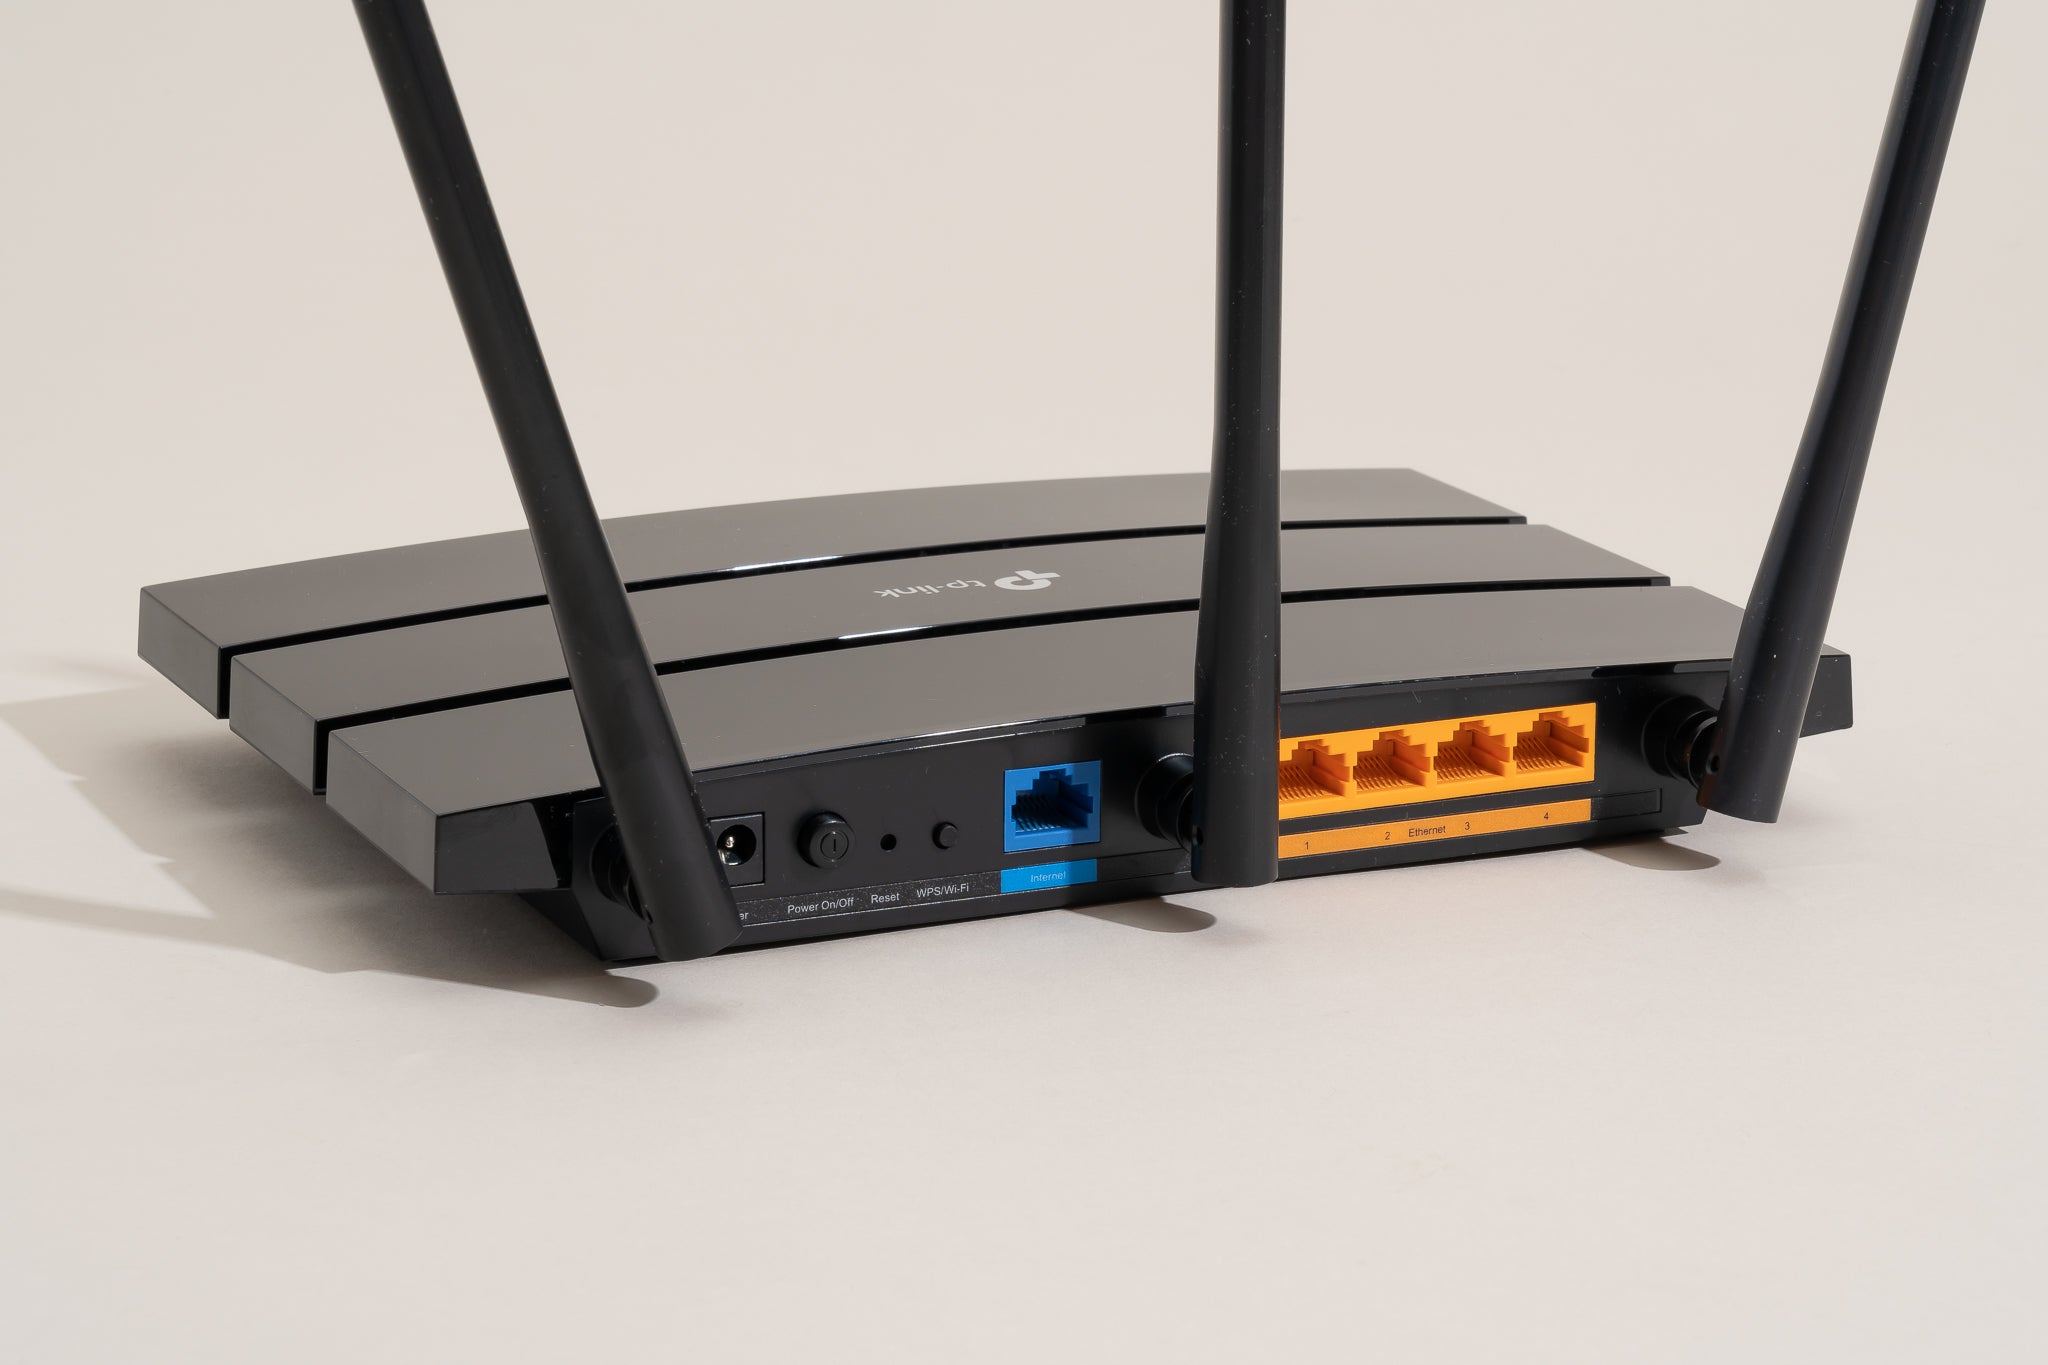 Bug in Arris Routers Let Hackers Exploit For RCE Attacks